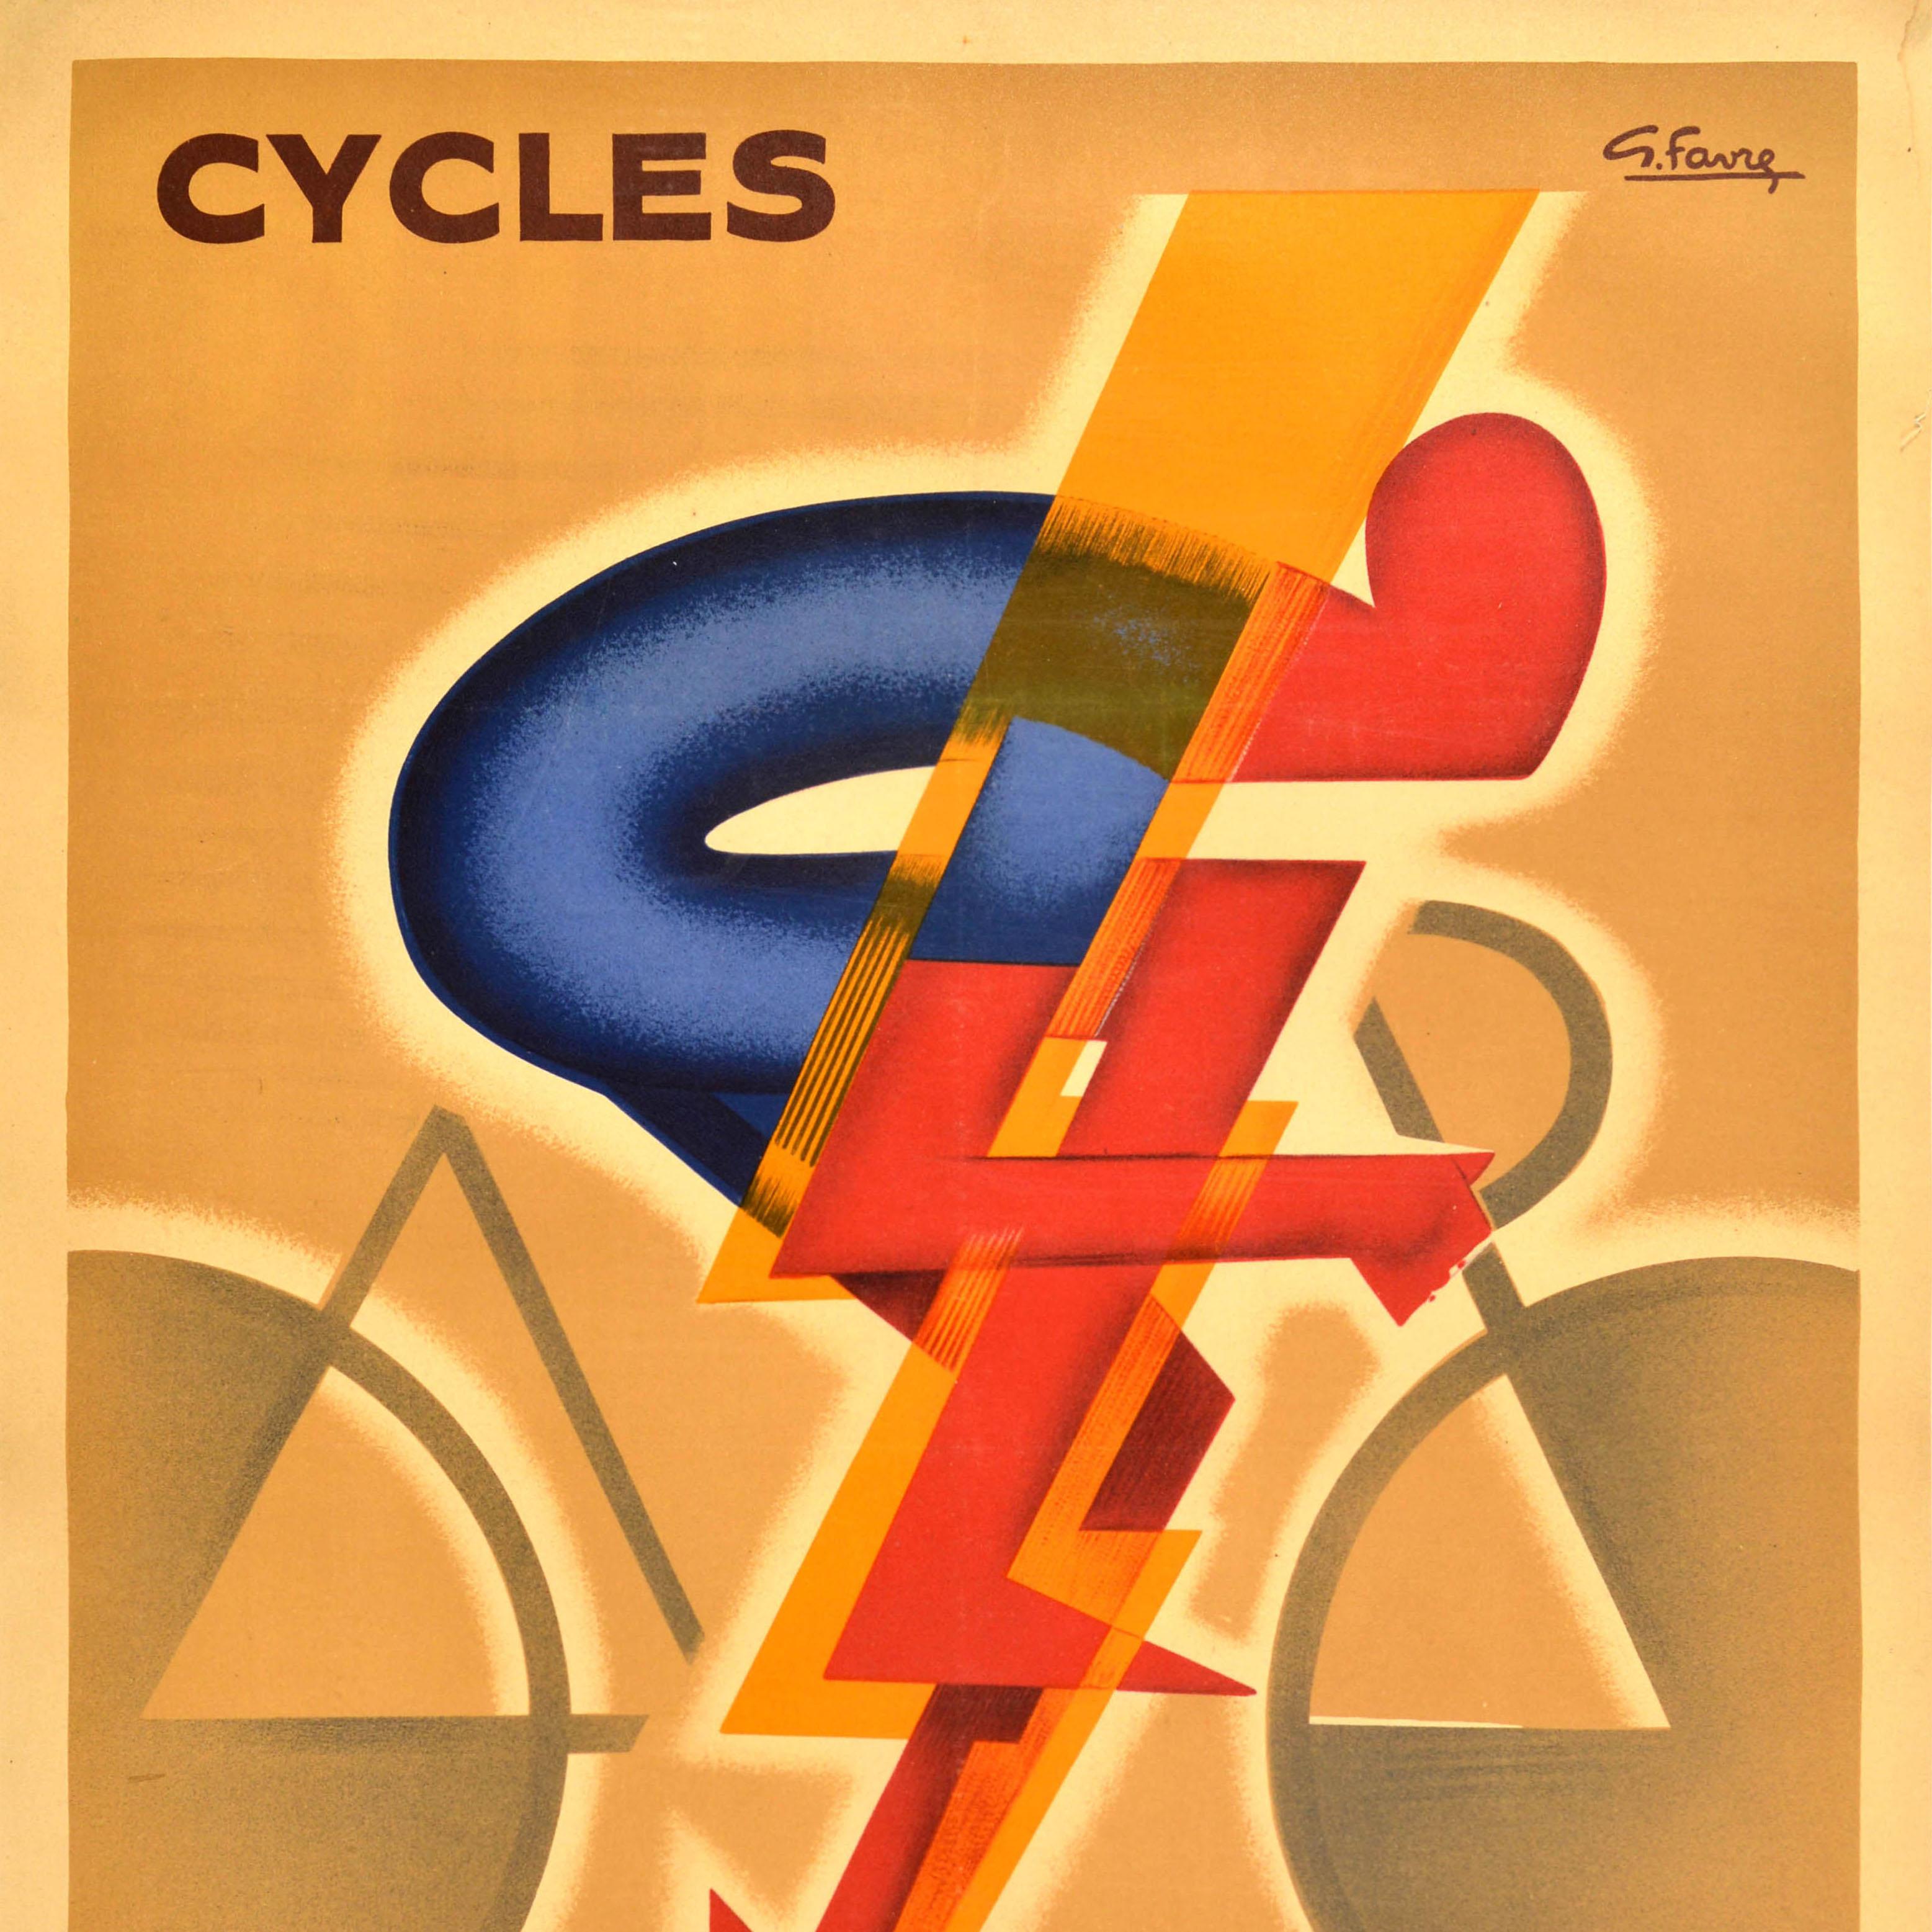 French Original Antique Advertising Poster Cycles Dilecta Georges Favre Art Deco Design For Sale